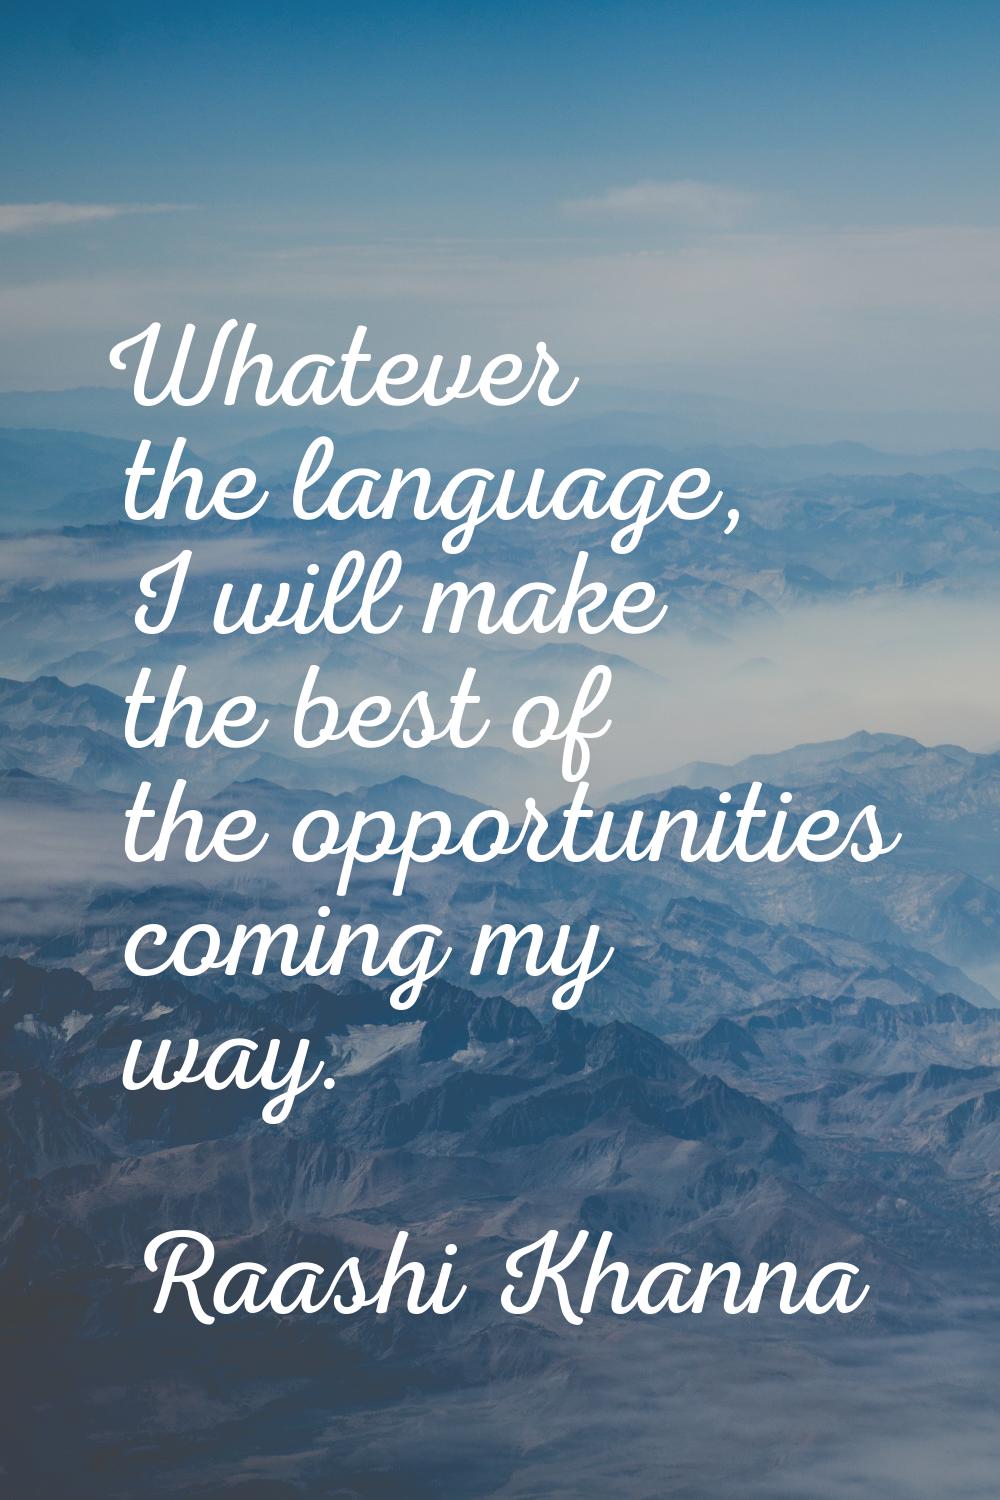 Whatever the language, I will make the best of the opportunities coming my way.